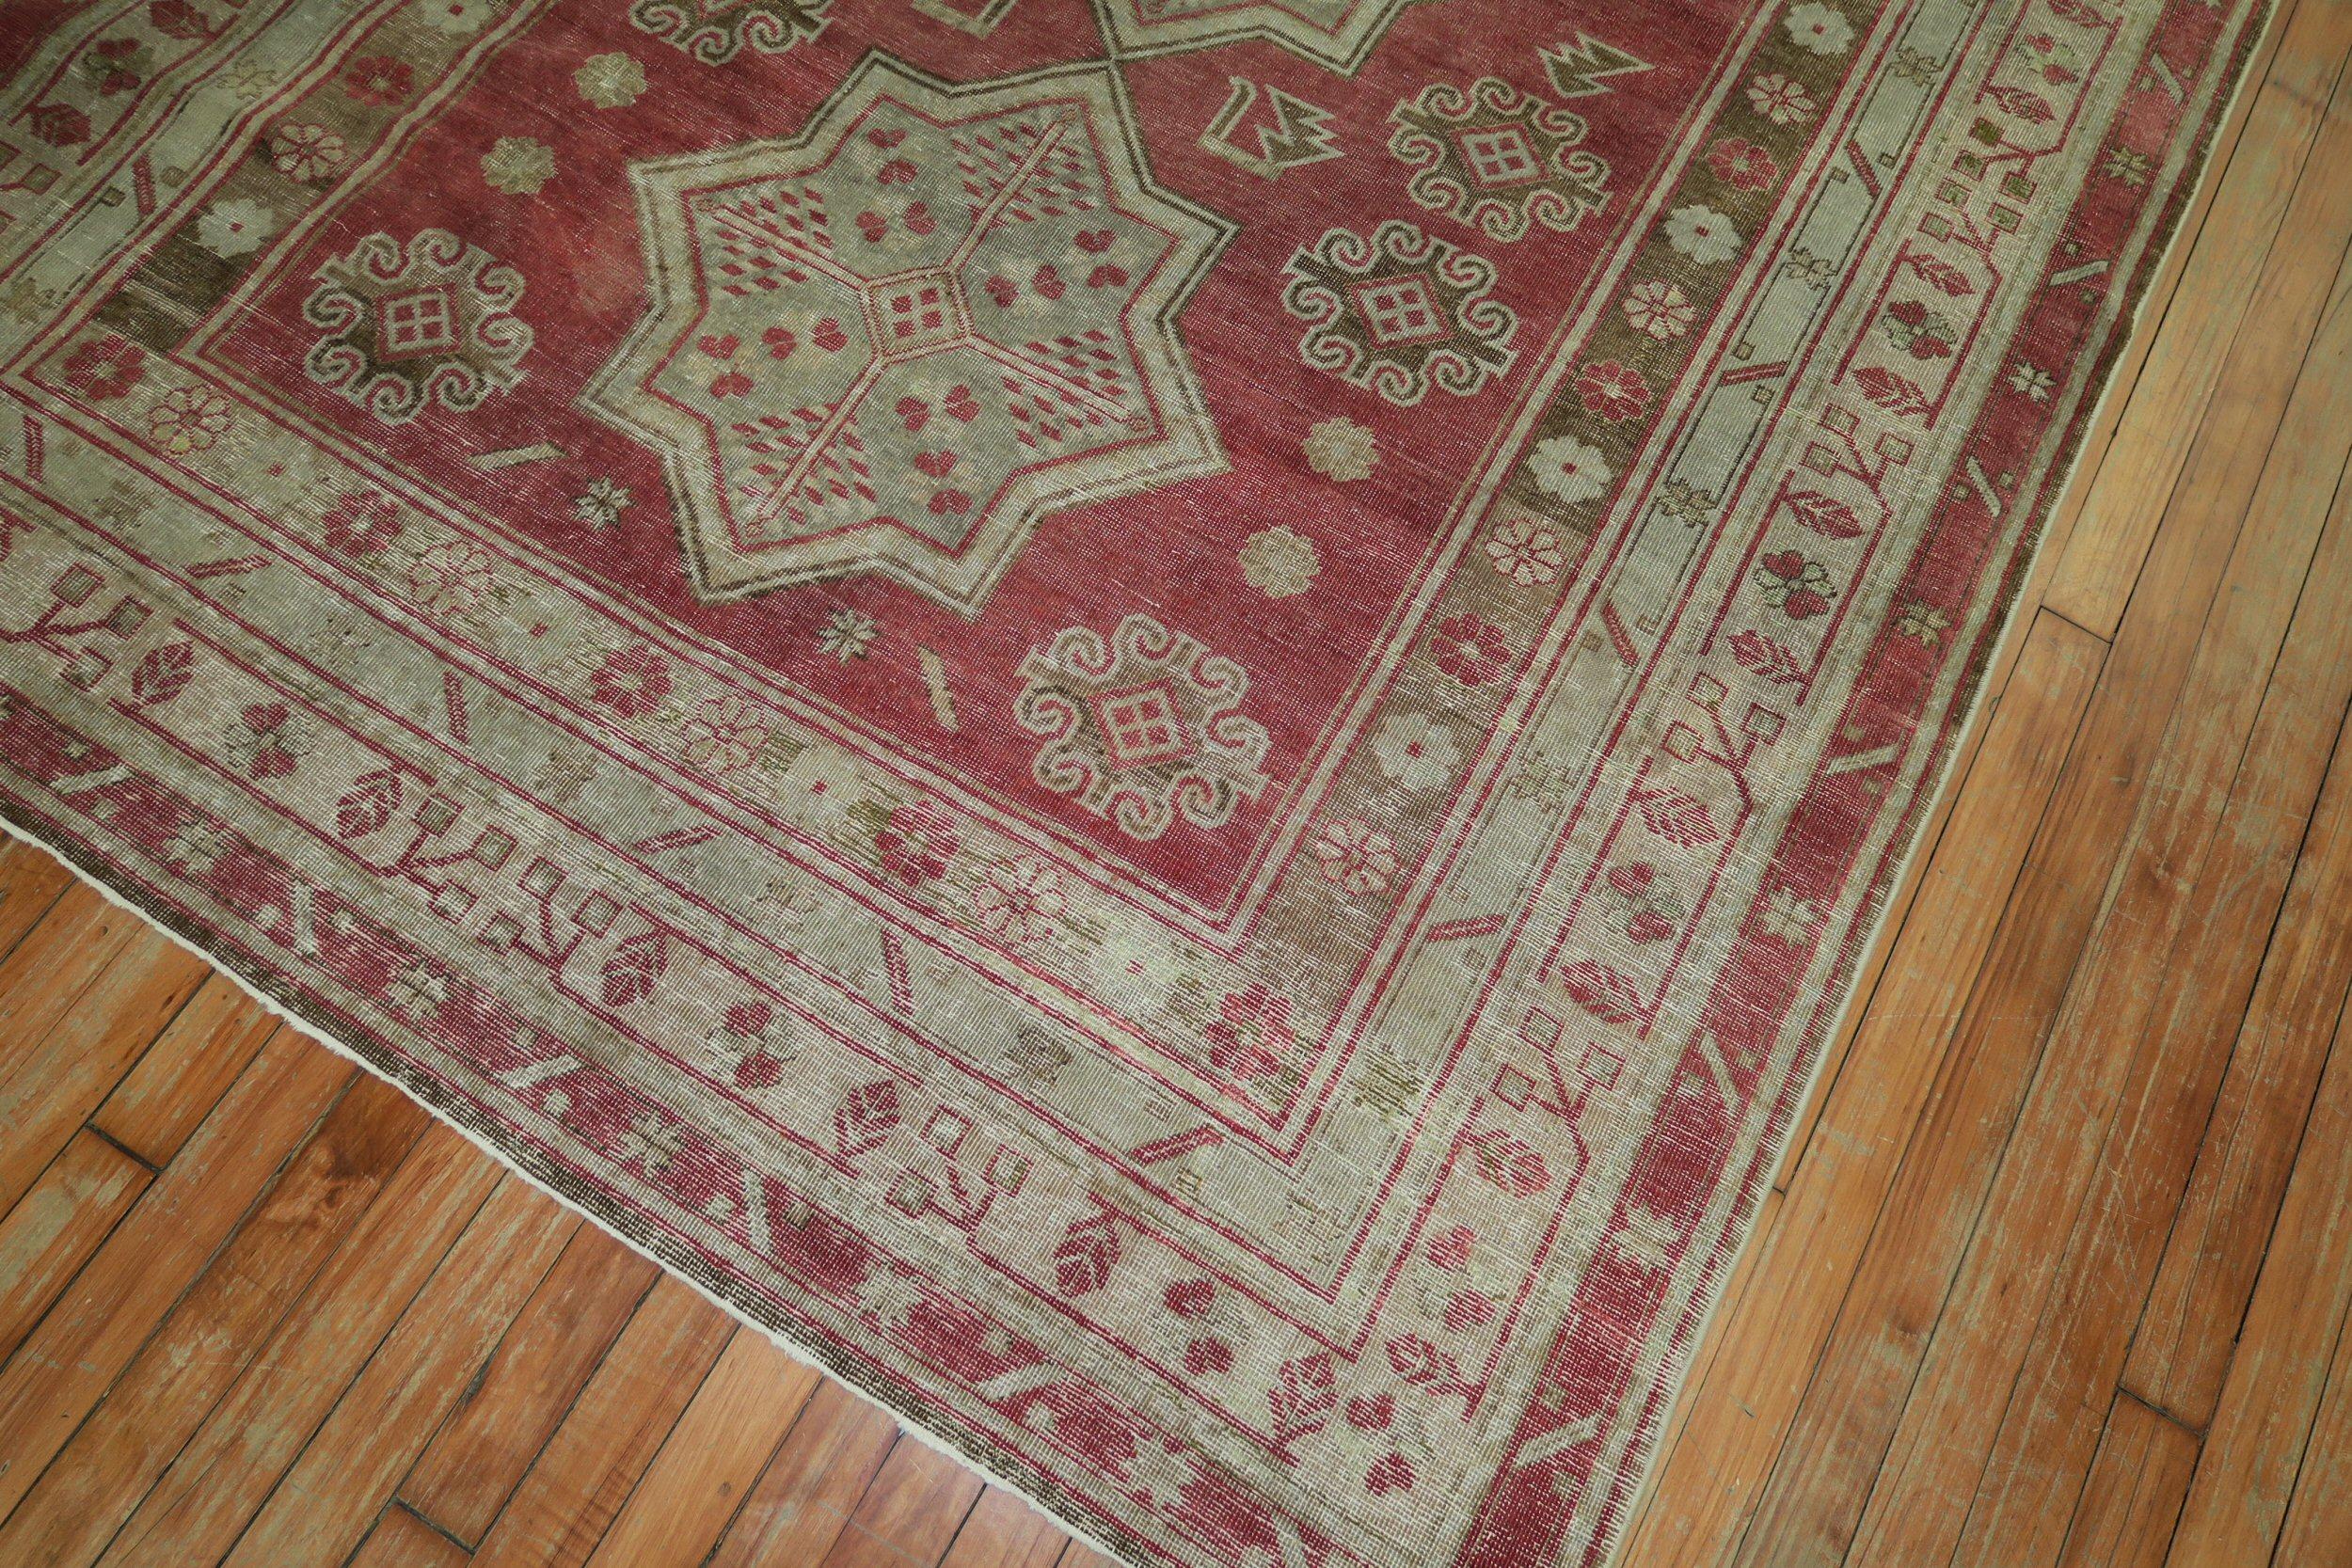 Agra Crimson Red Central Asian Rug For Sale